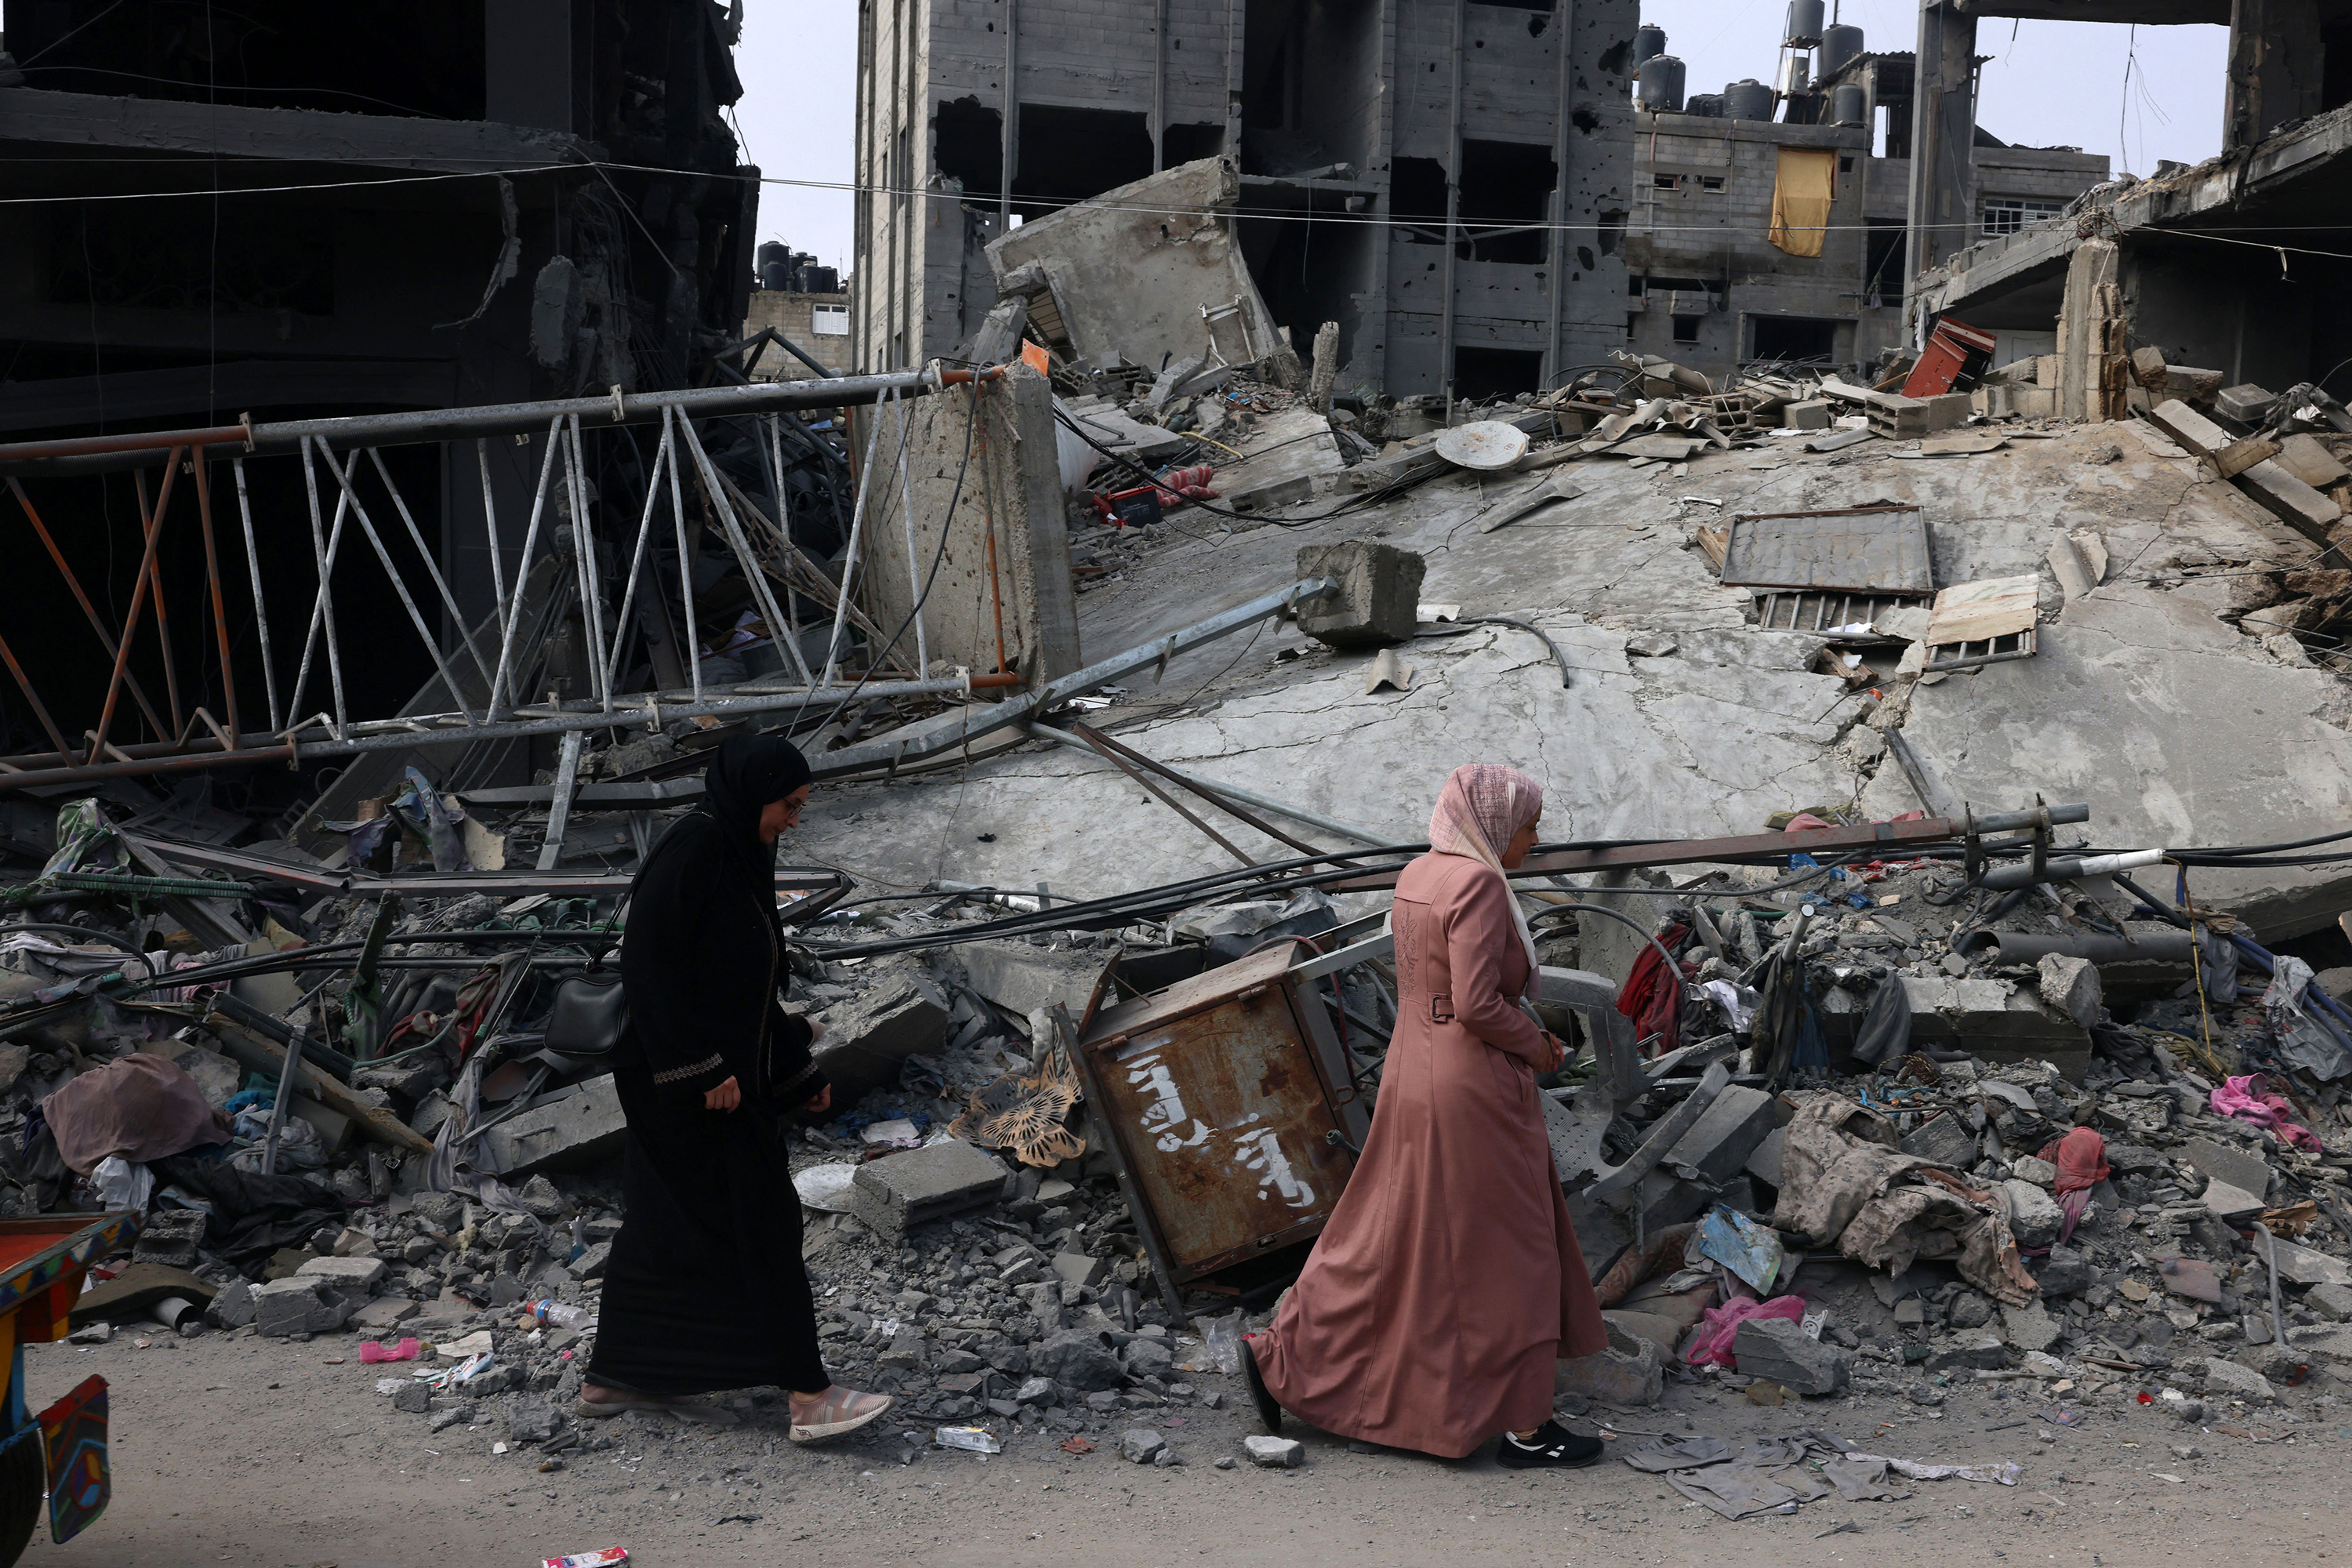 Women walk past a destroyed building in the aftermath of Israeli bombing in Rafah, Gaza on October 28.